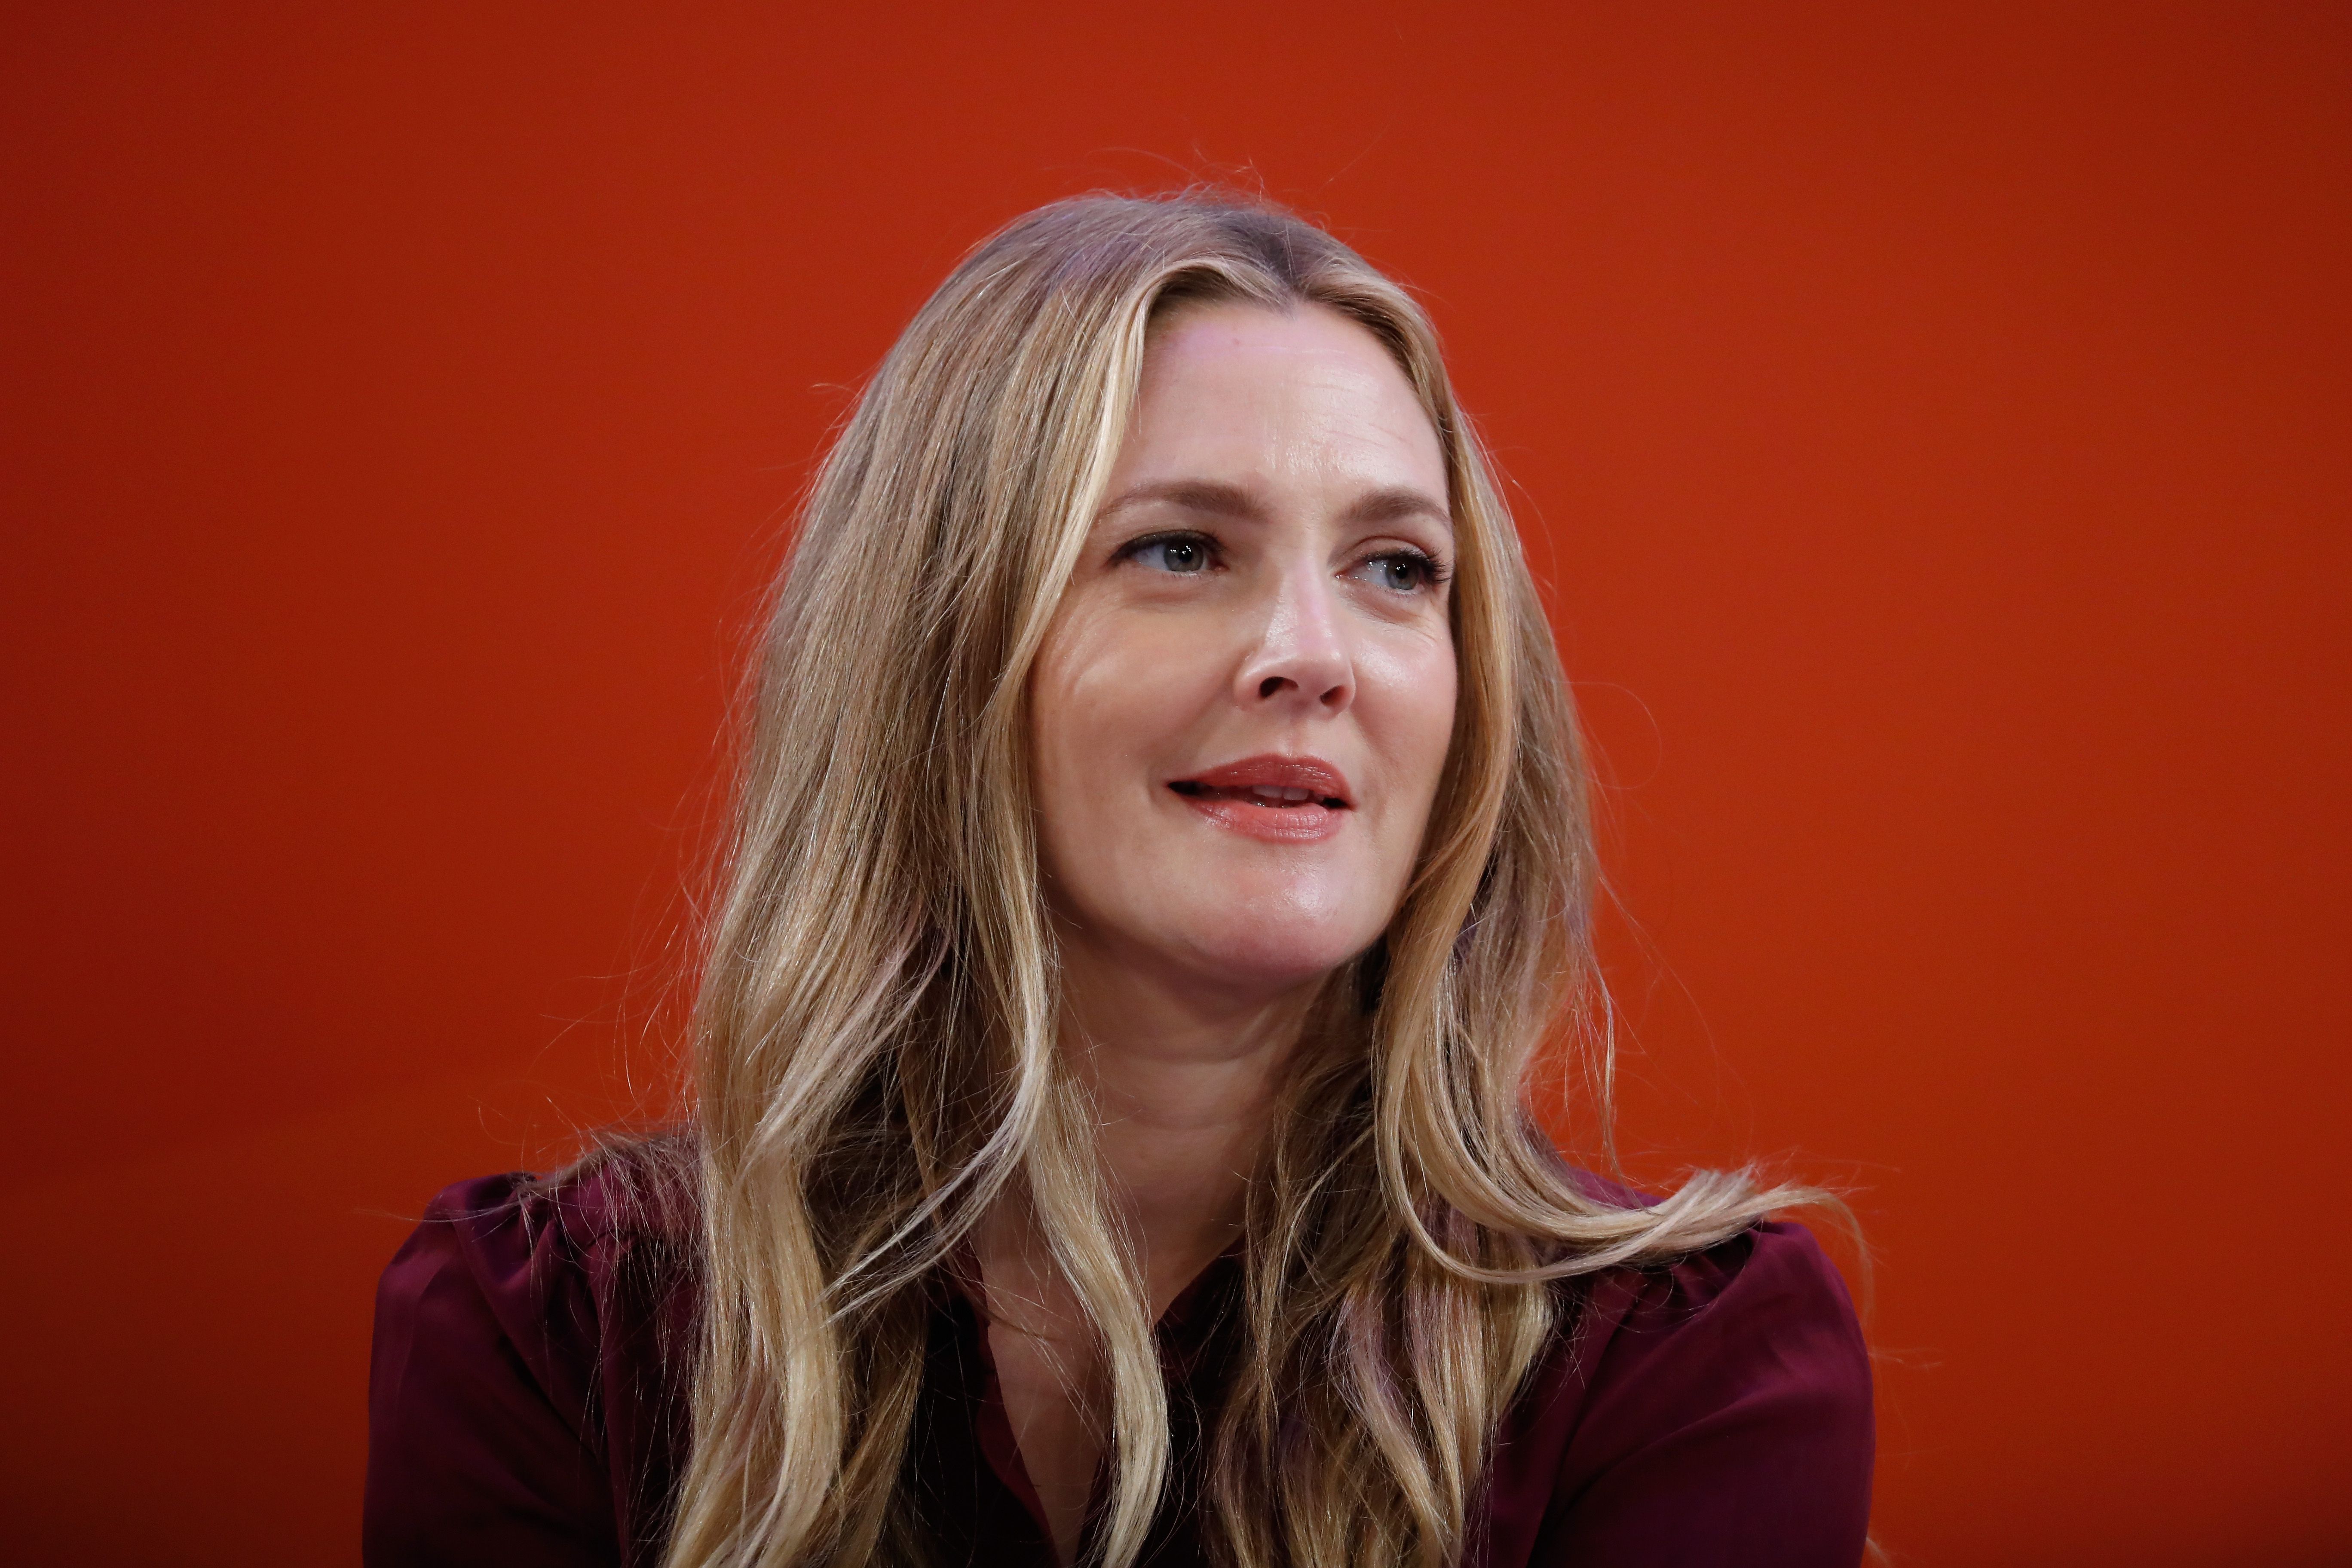 Drew Barrymore and Cameron Diaz Just Changed the Kitchen Appliance Color  Game